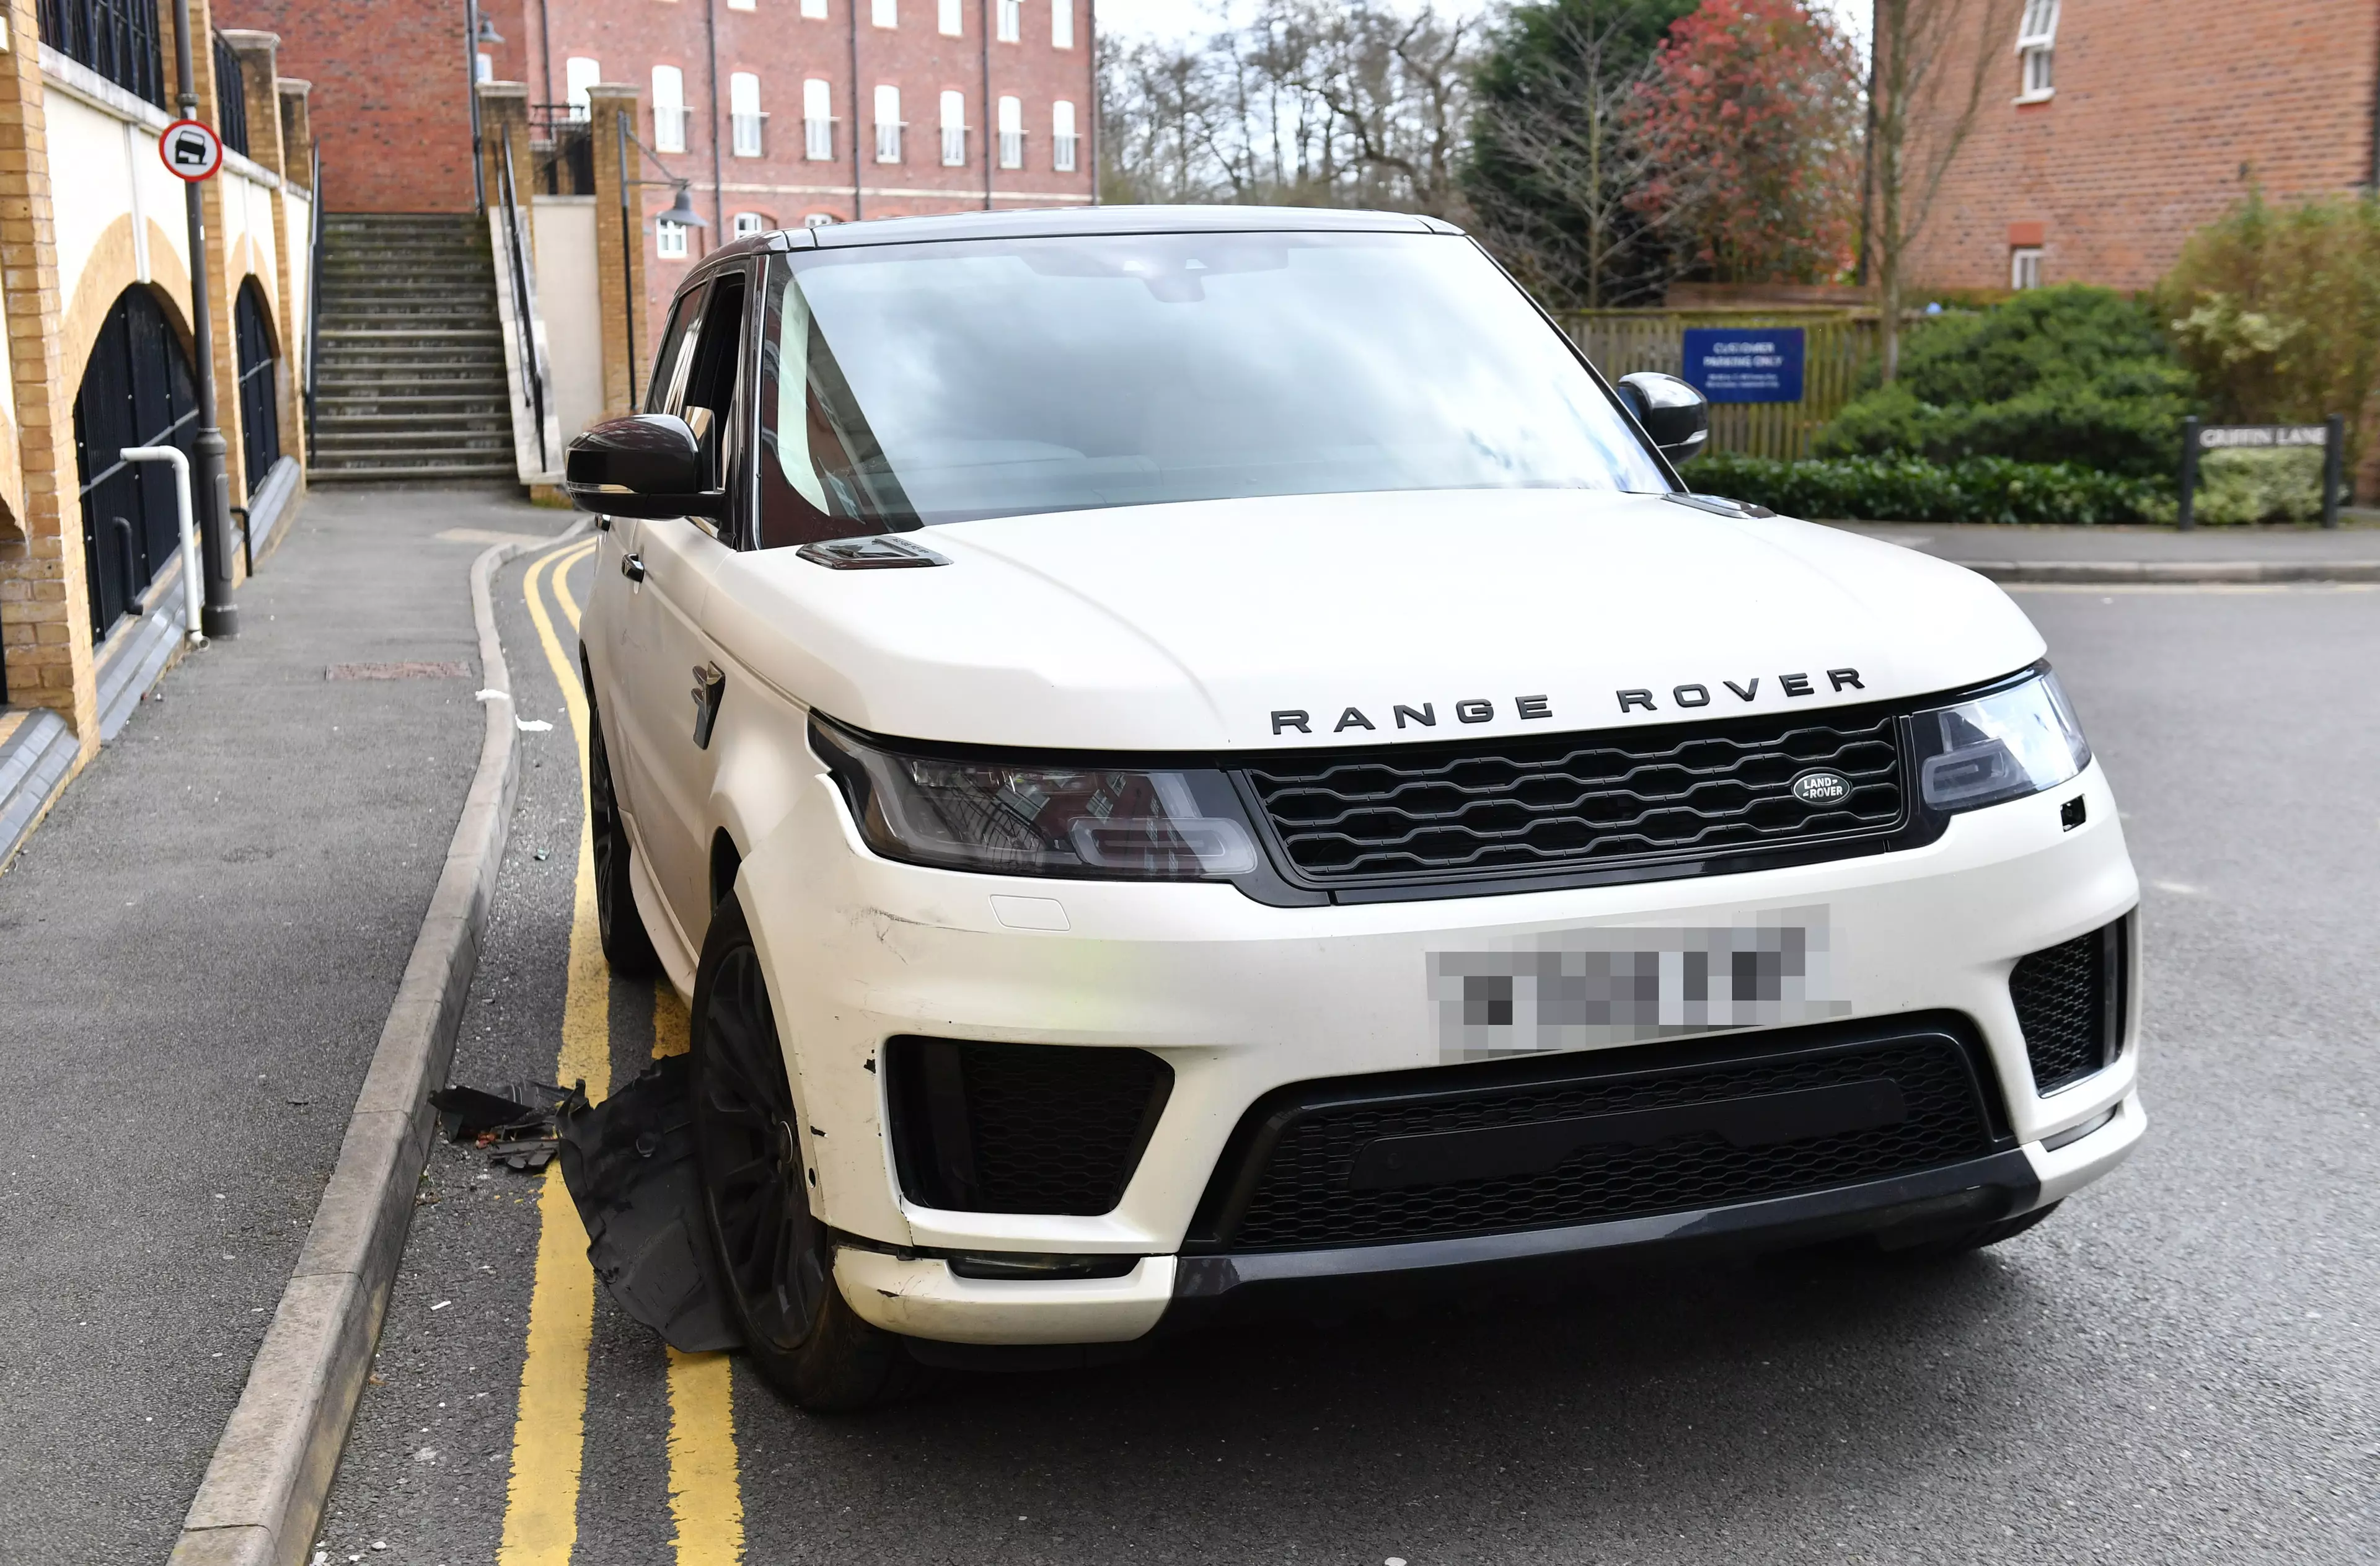 A damaged white Range Rover after reports of a crash with parked cars in the Dickens Heath area of Solihull.